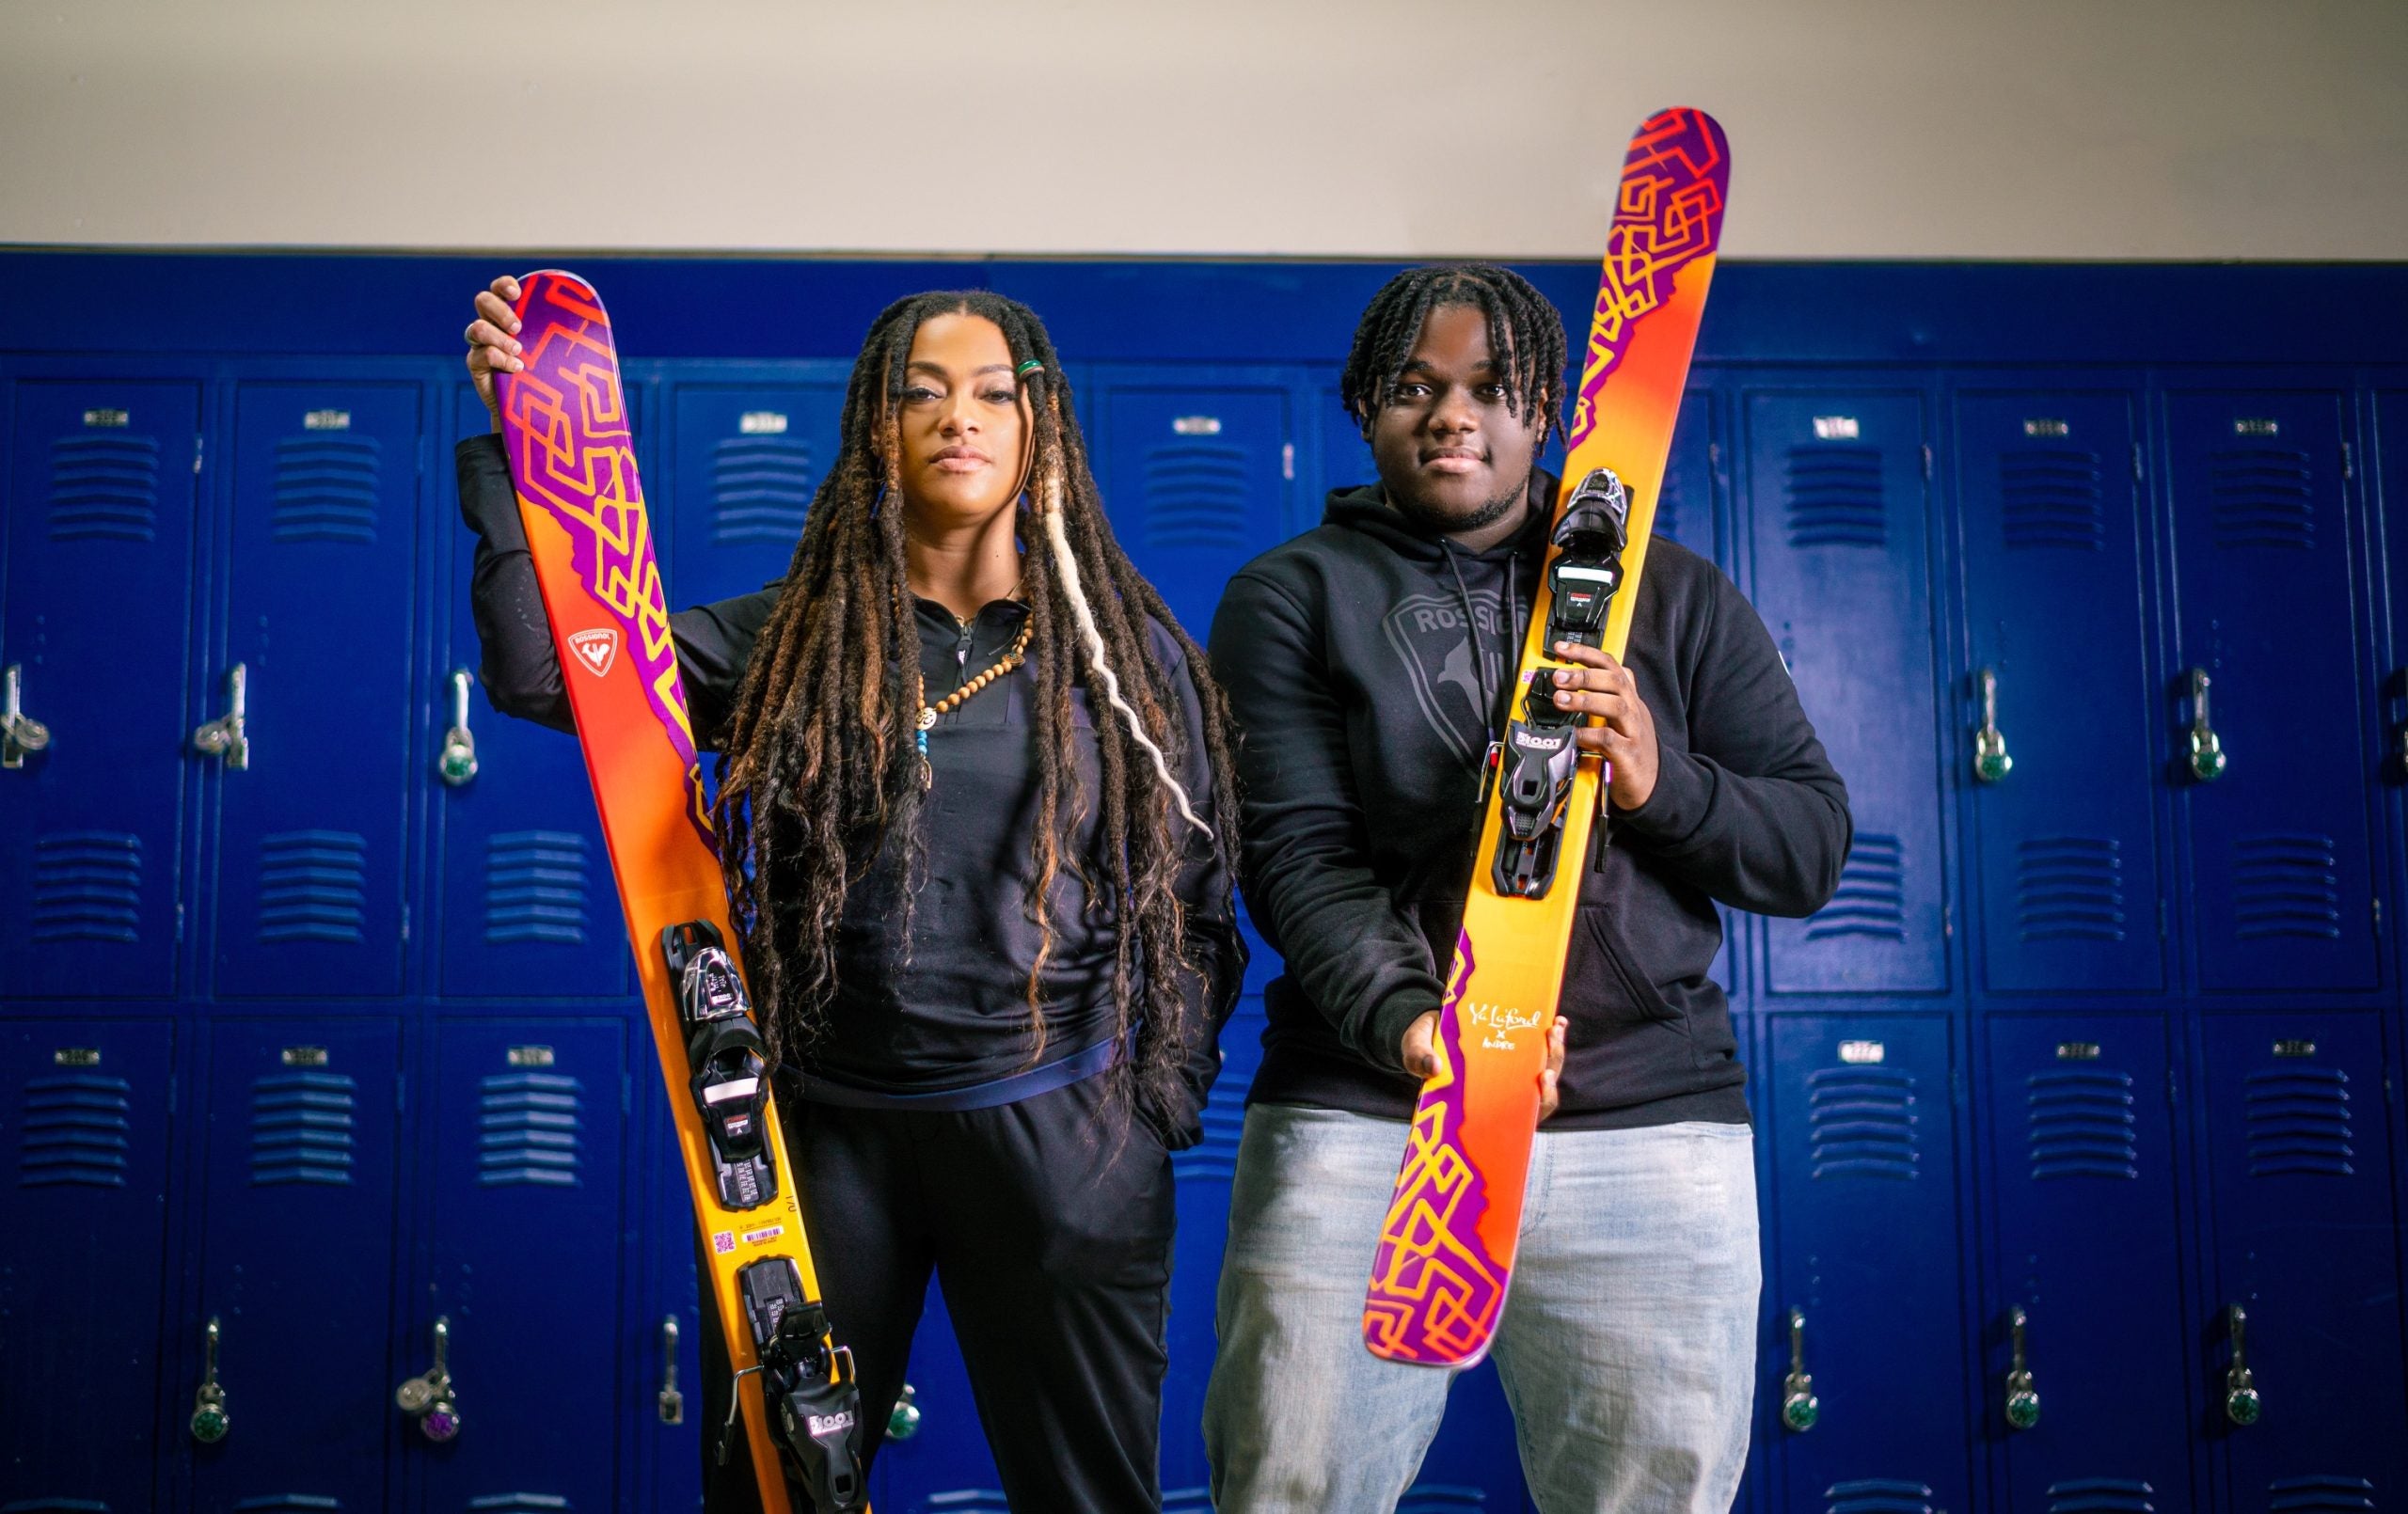 This Acclaimed Artist Partnered With Ski Brand Rossignol To Get Black Youth On The Slopes